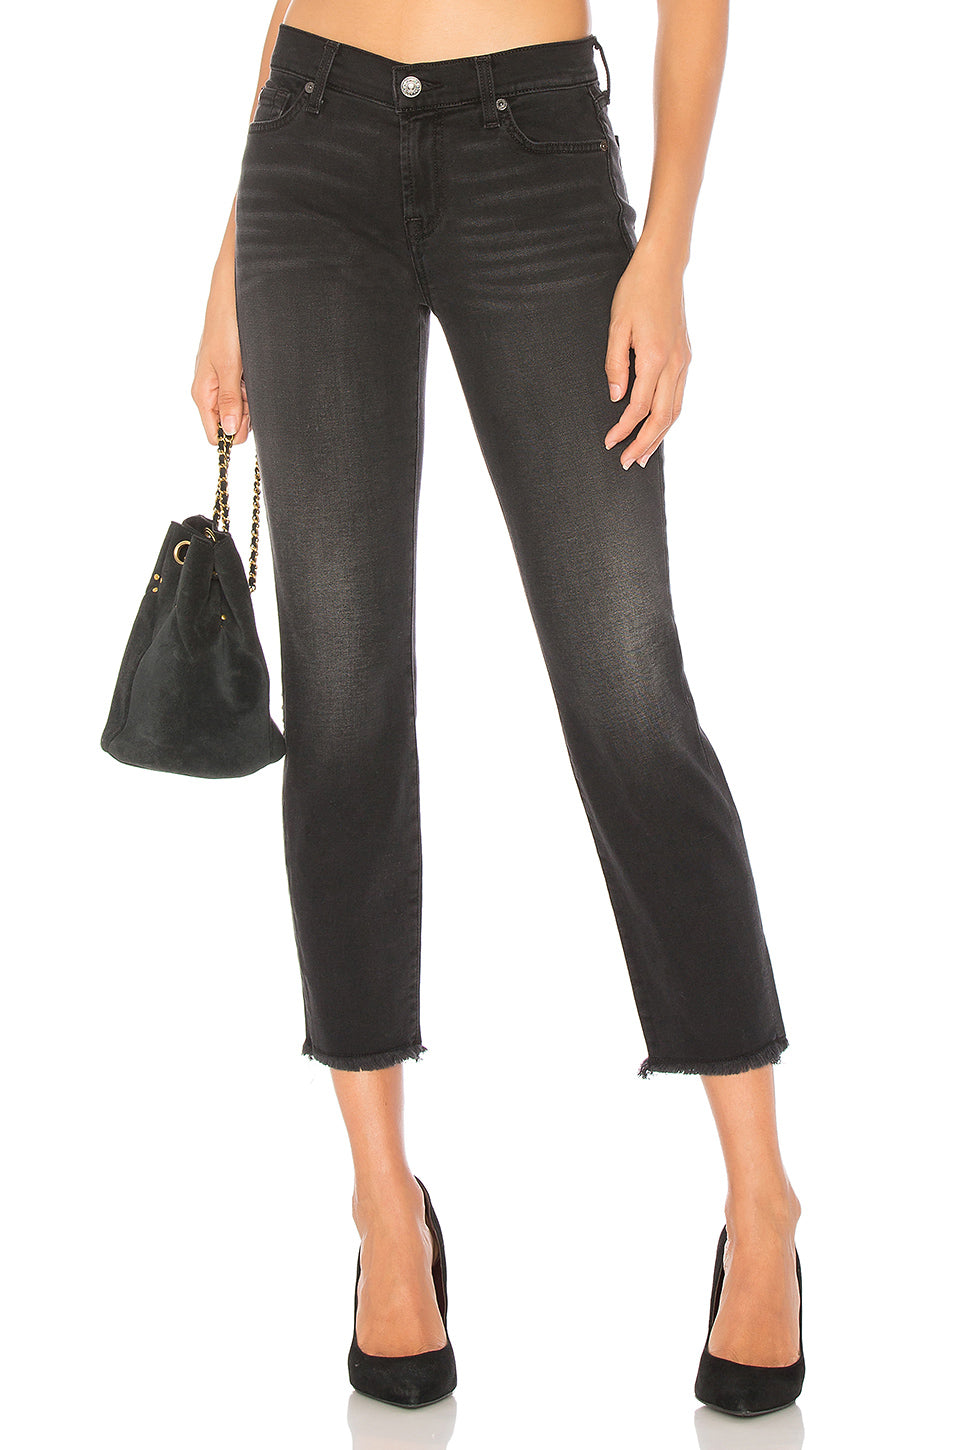 7 For All Mankind Roxanne Ankle Jean - Size 26 - NEW!